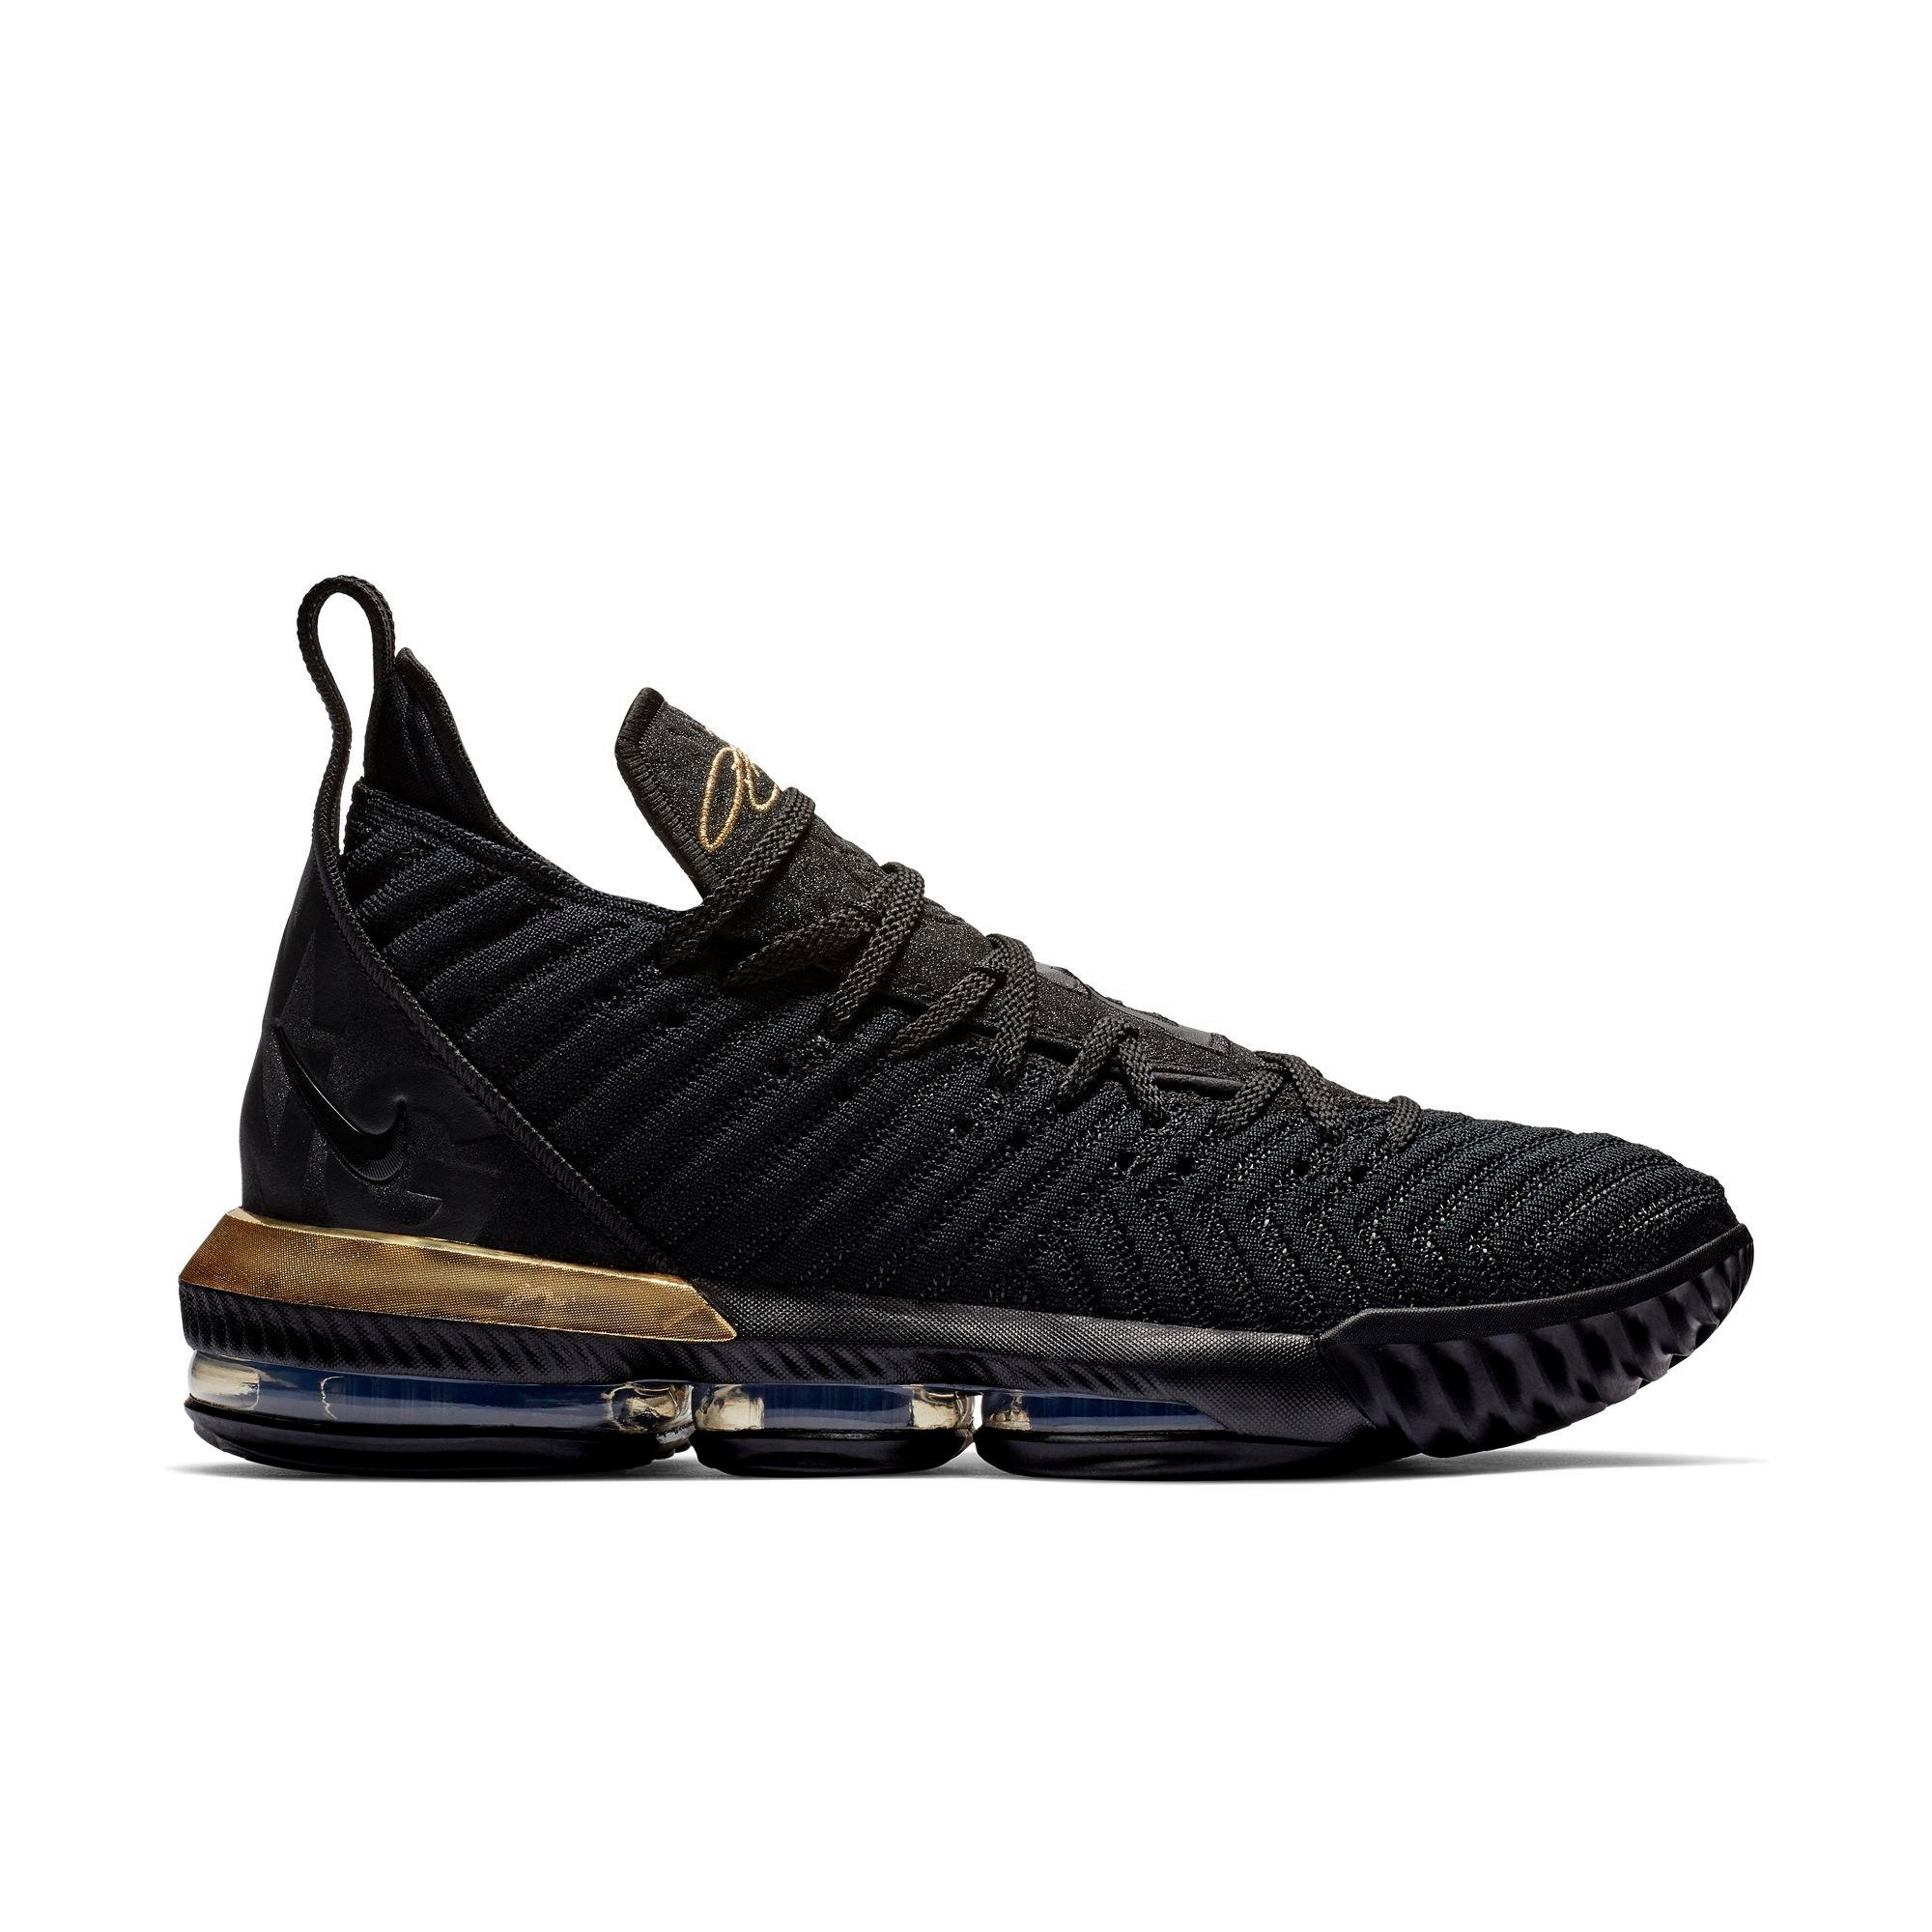 lebron 16 shoes black and gold